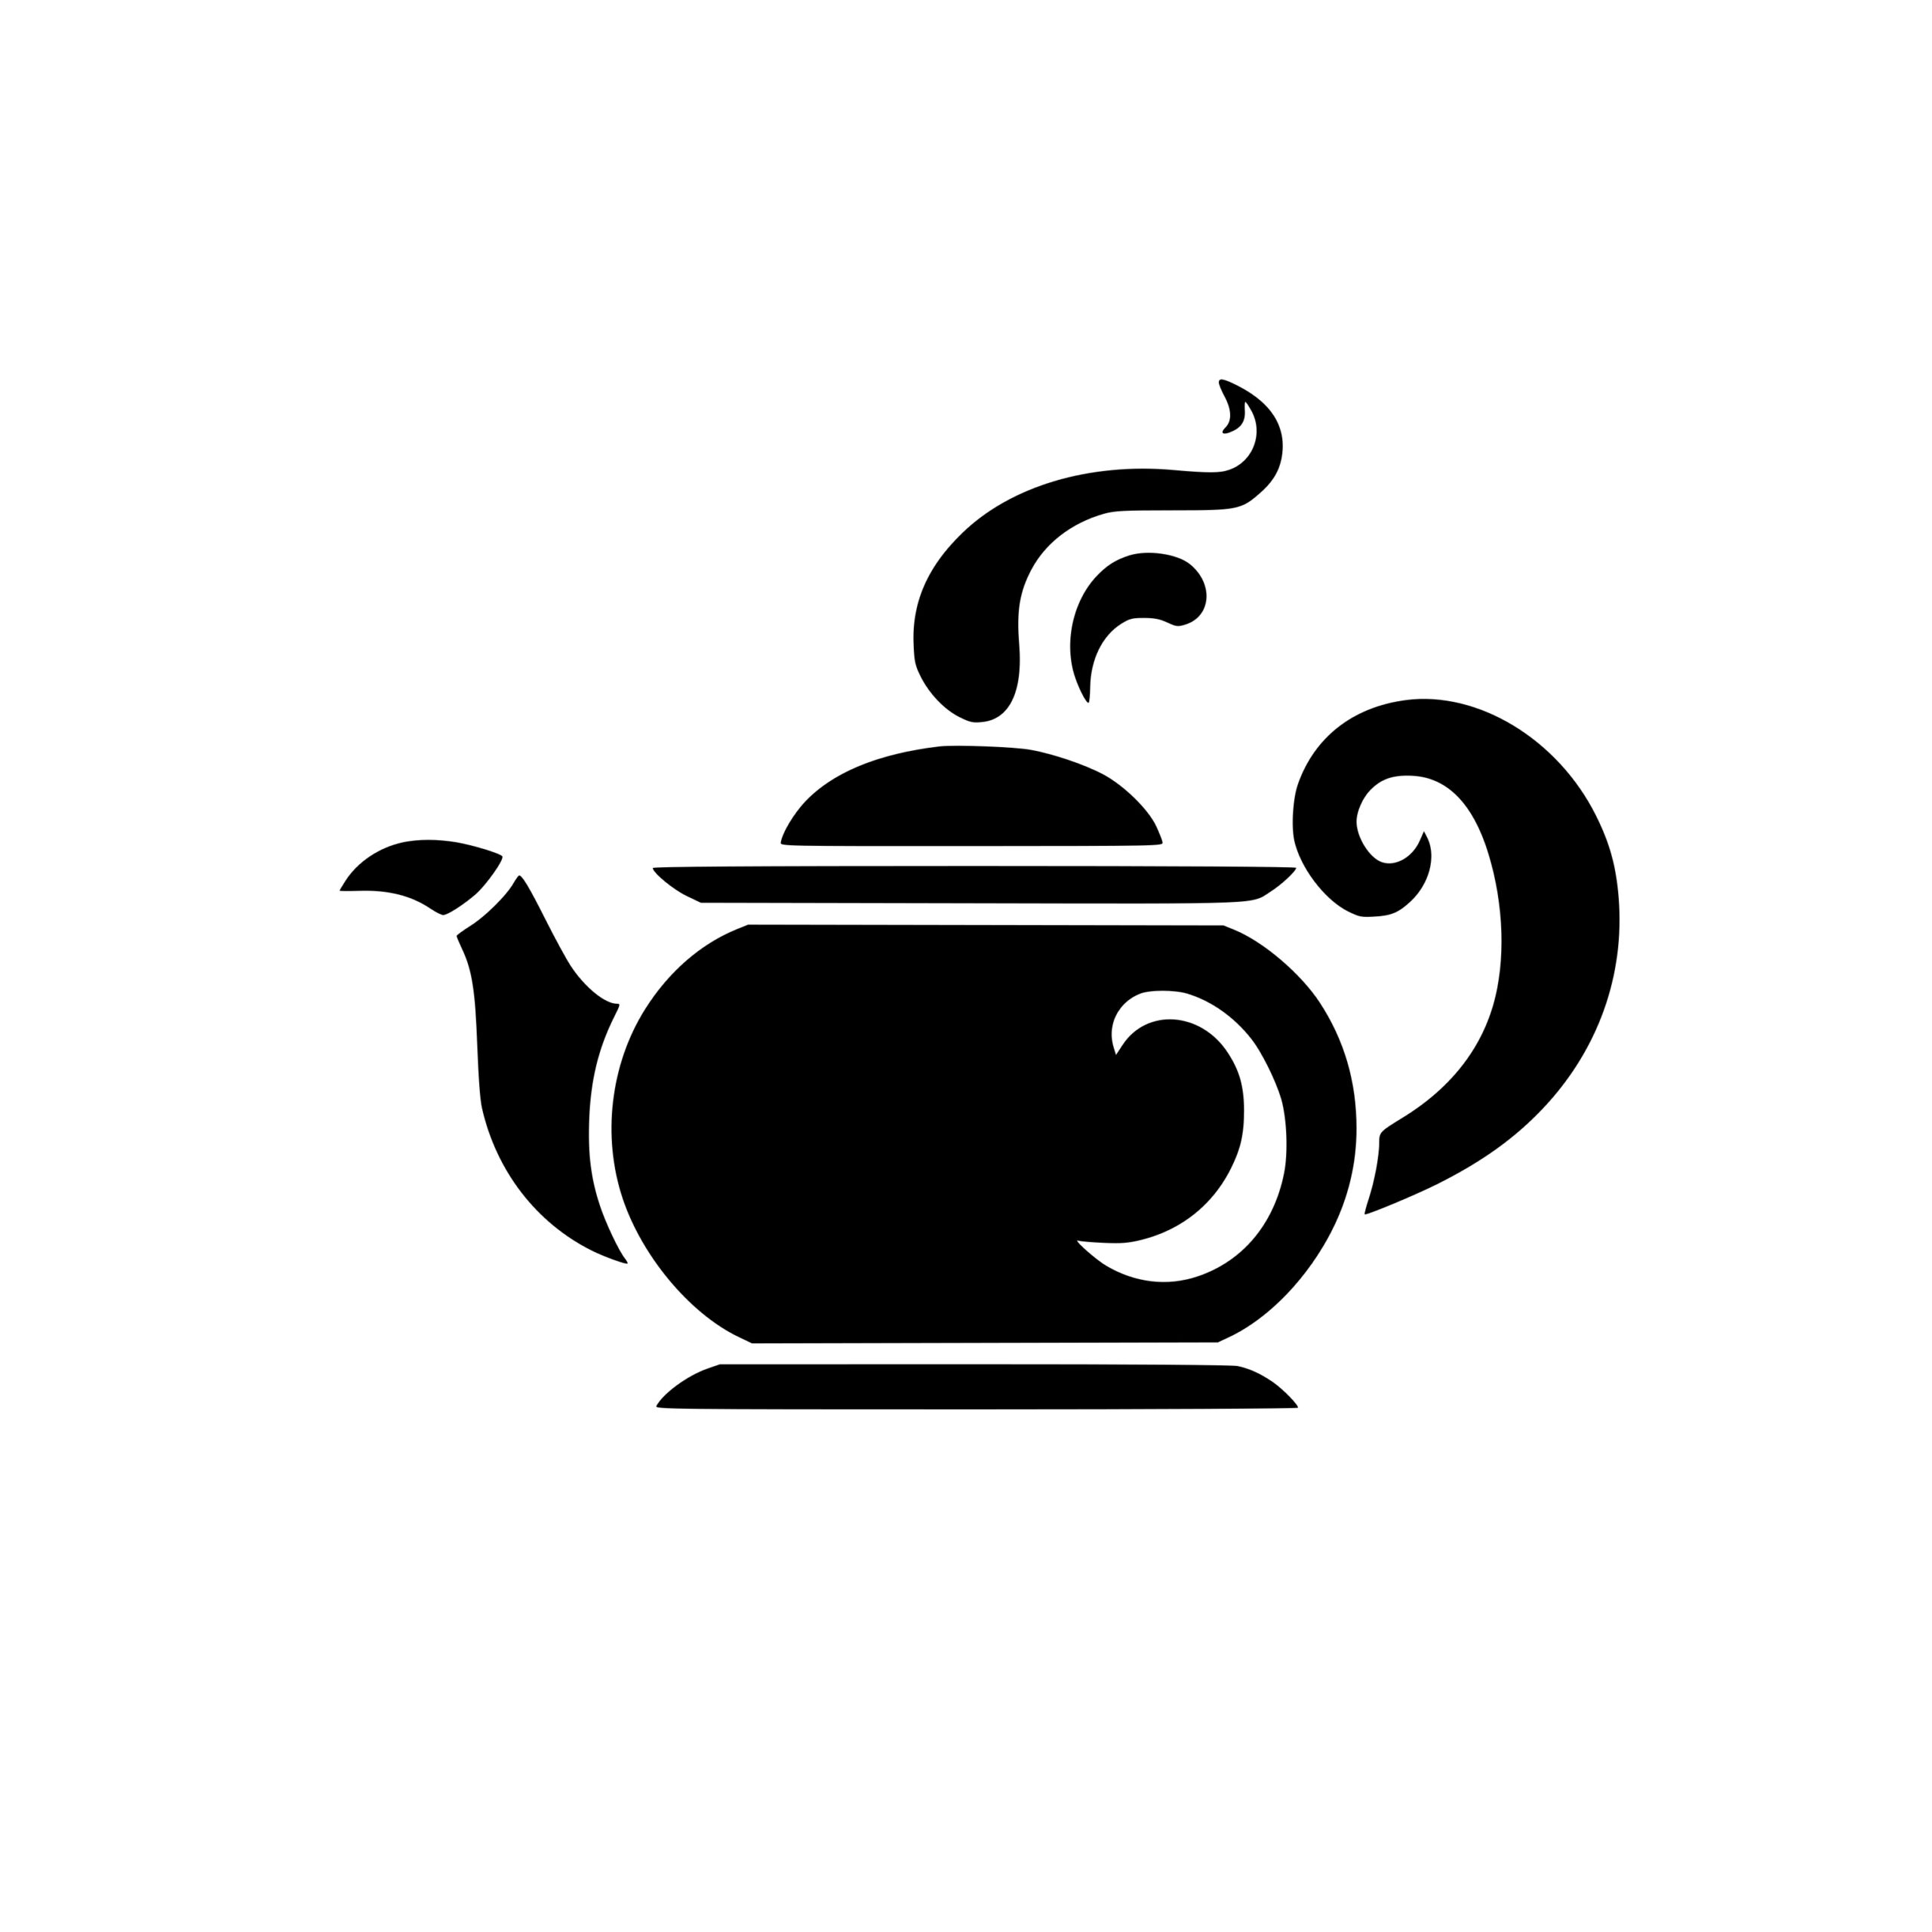 Steaming Teapot SVG Image for Cricut, Silhouette, Laser Machines